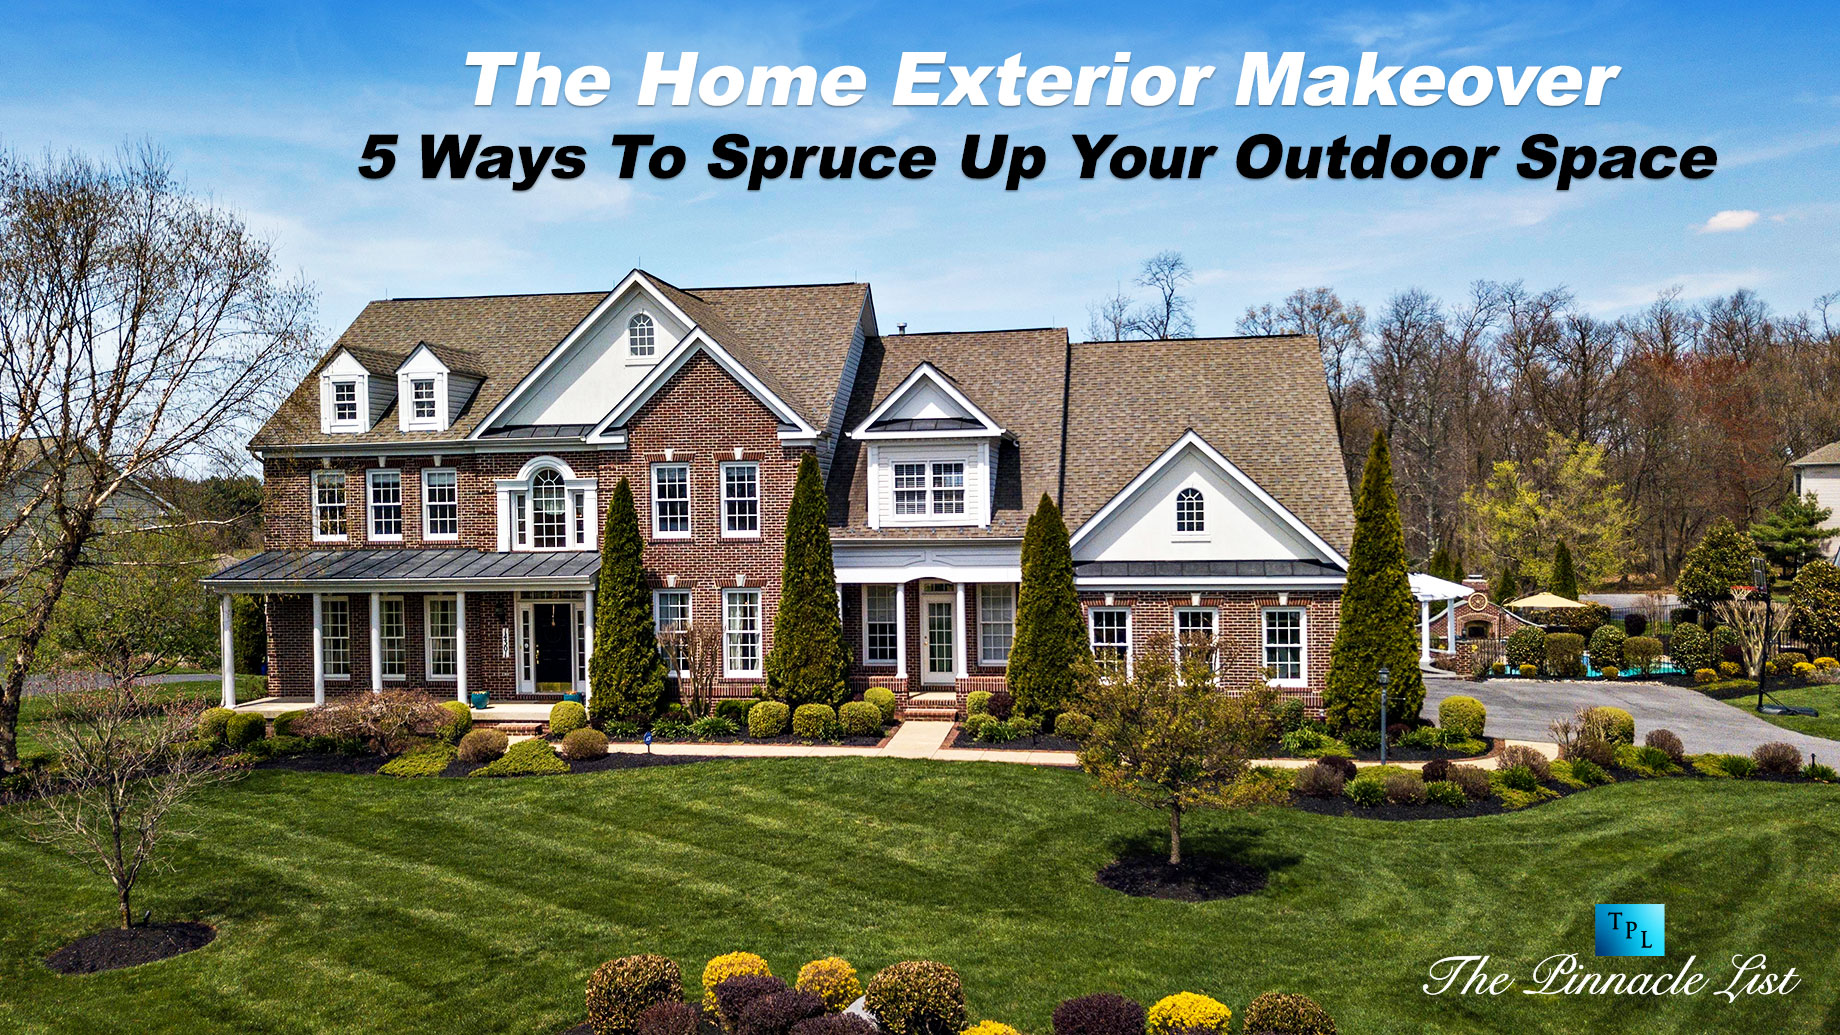 The Home Exterior Makeover - 5 Ways To Spruce Up Your Outdoor Space